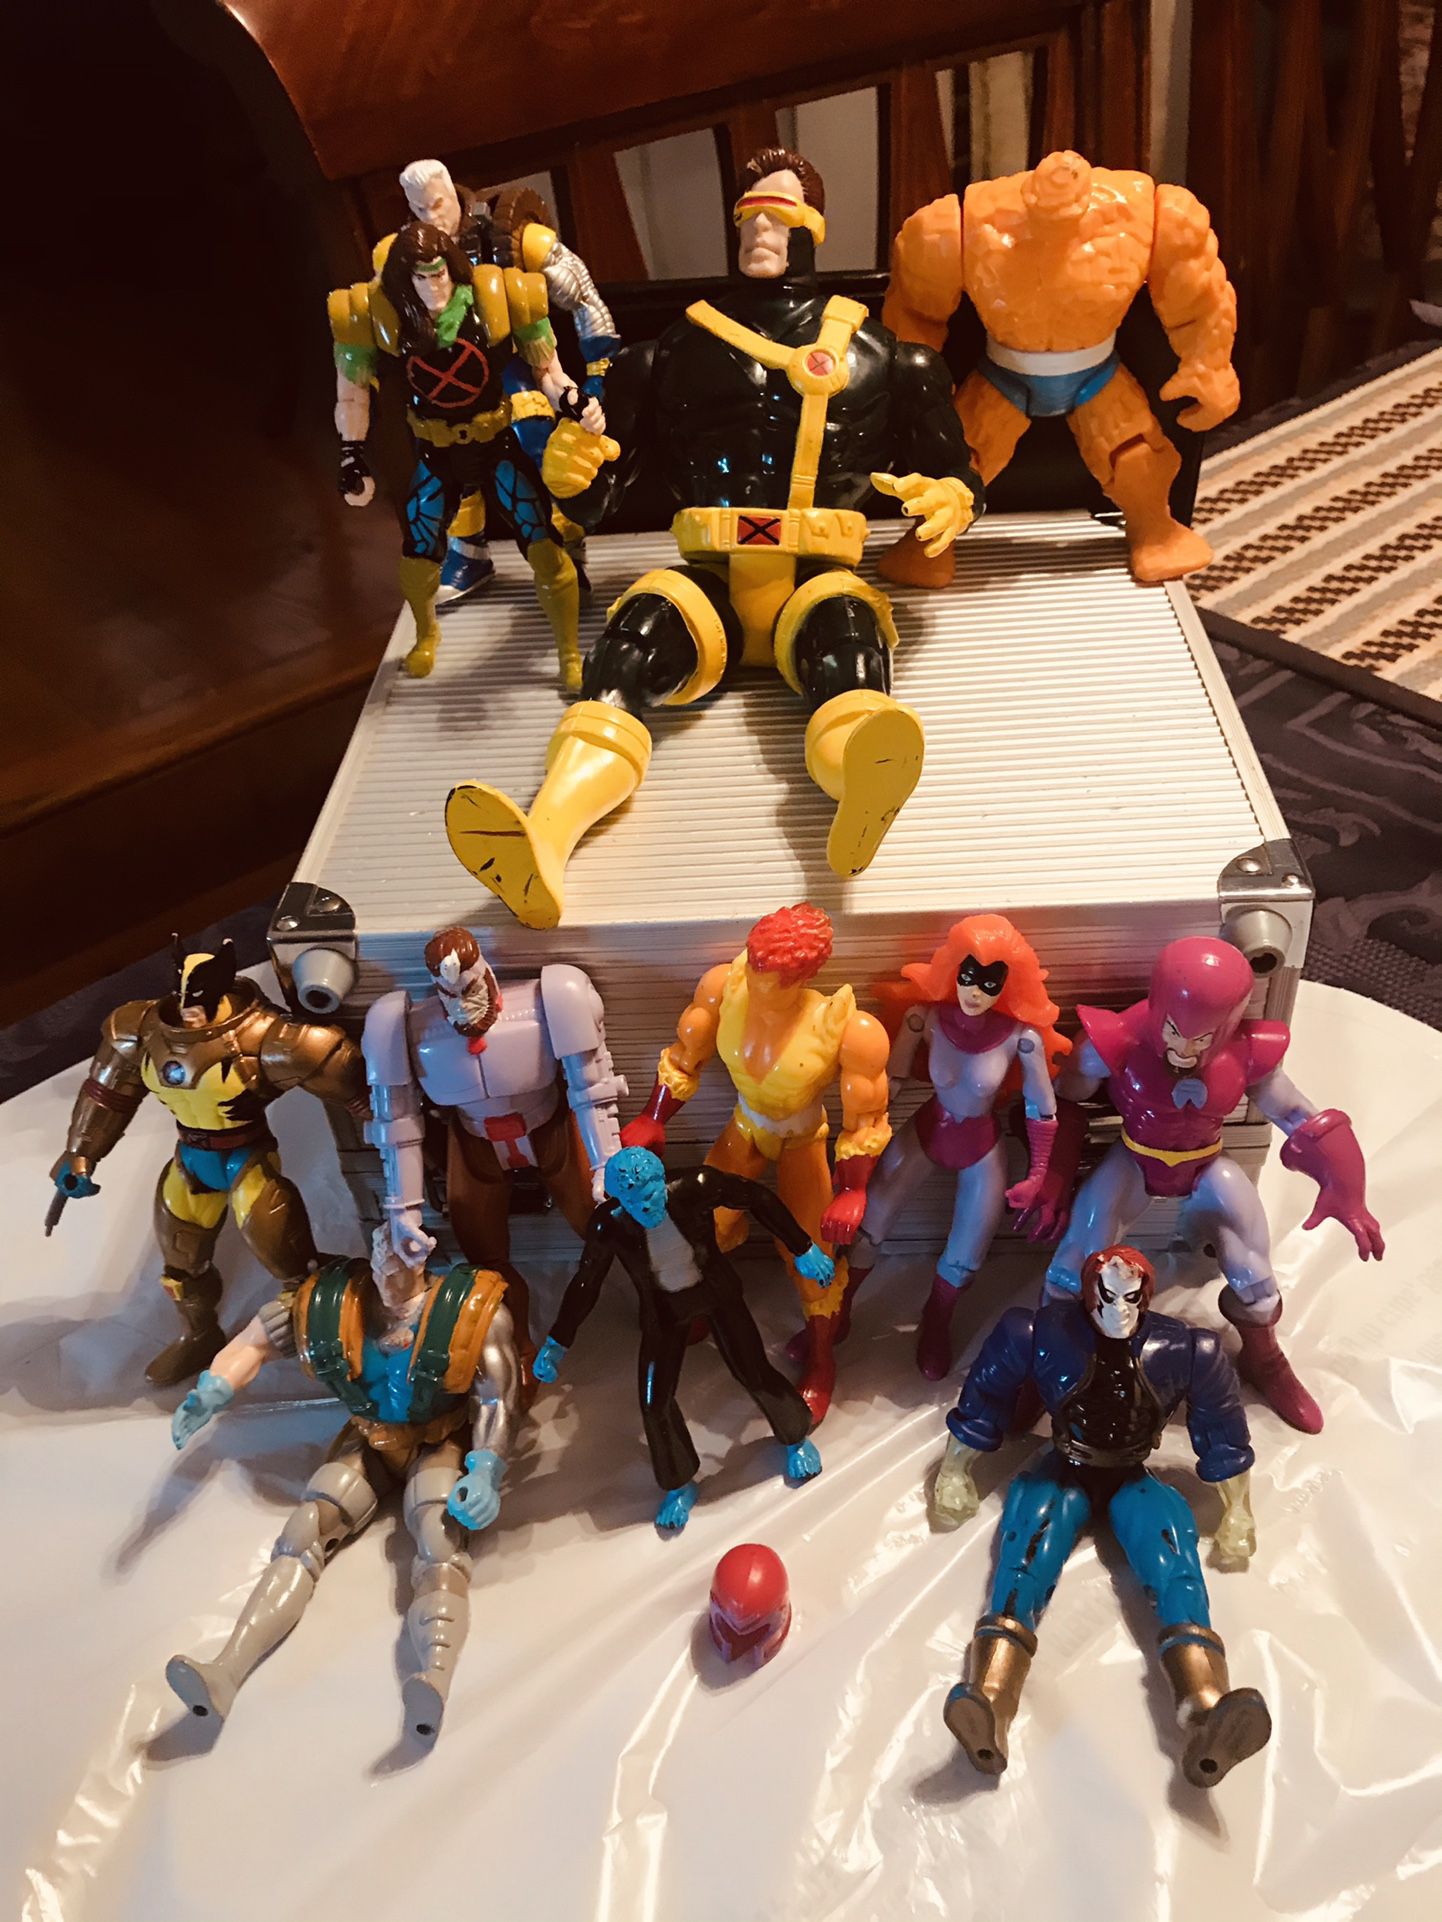 12 Vintage Marvel Figures, (10) 5’ Inches, The One With Blue Face Is 4’ inches Meal Toy 10’ Inch Cyclops View Pics Read Description 